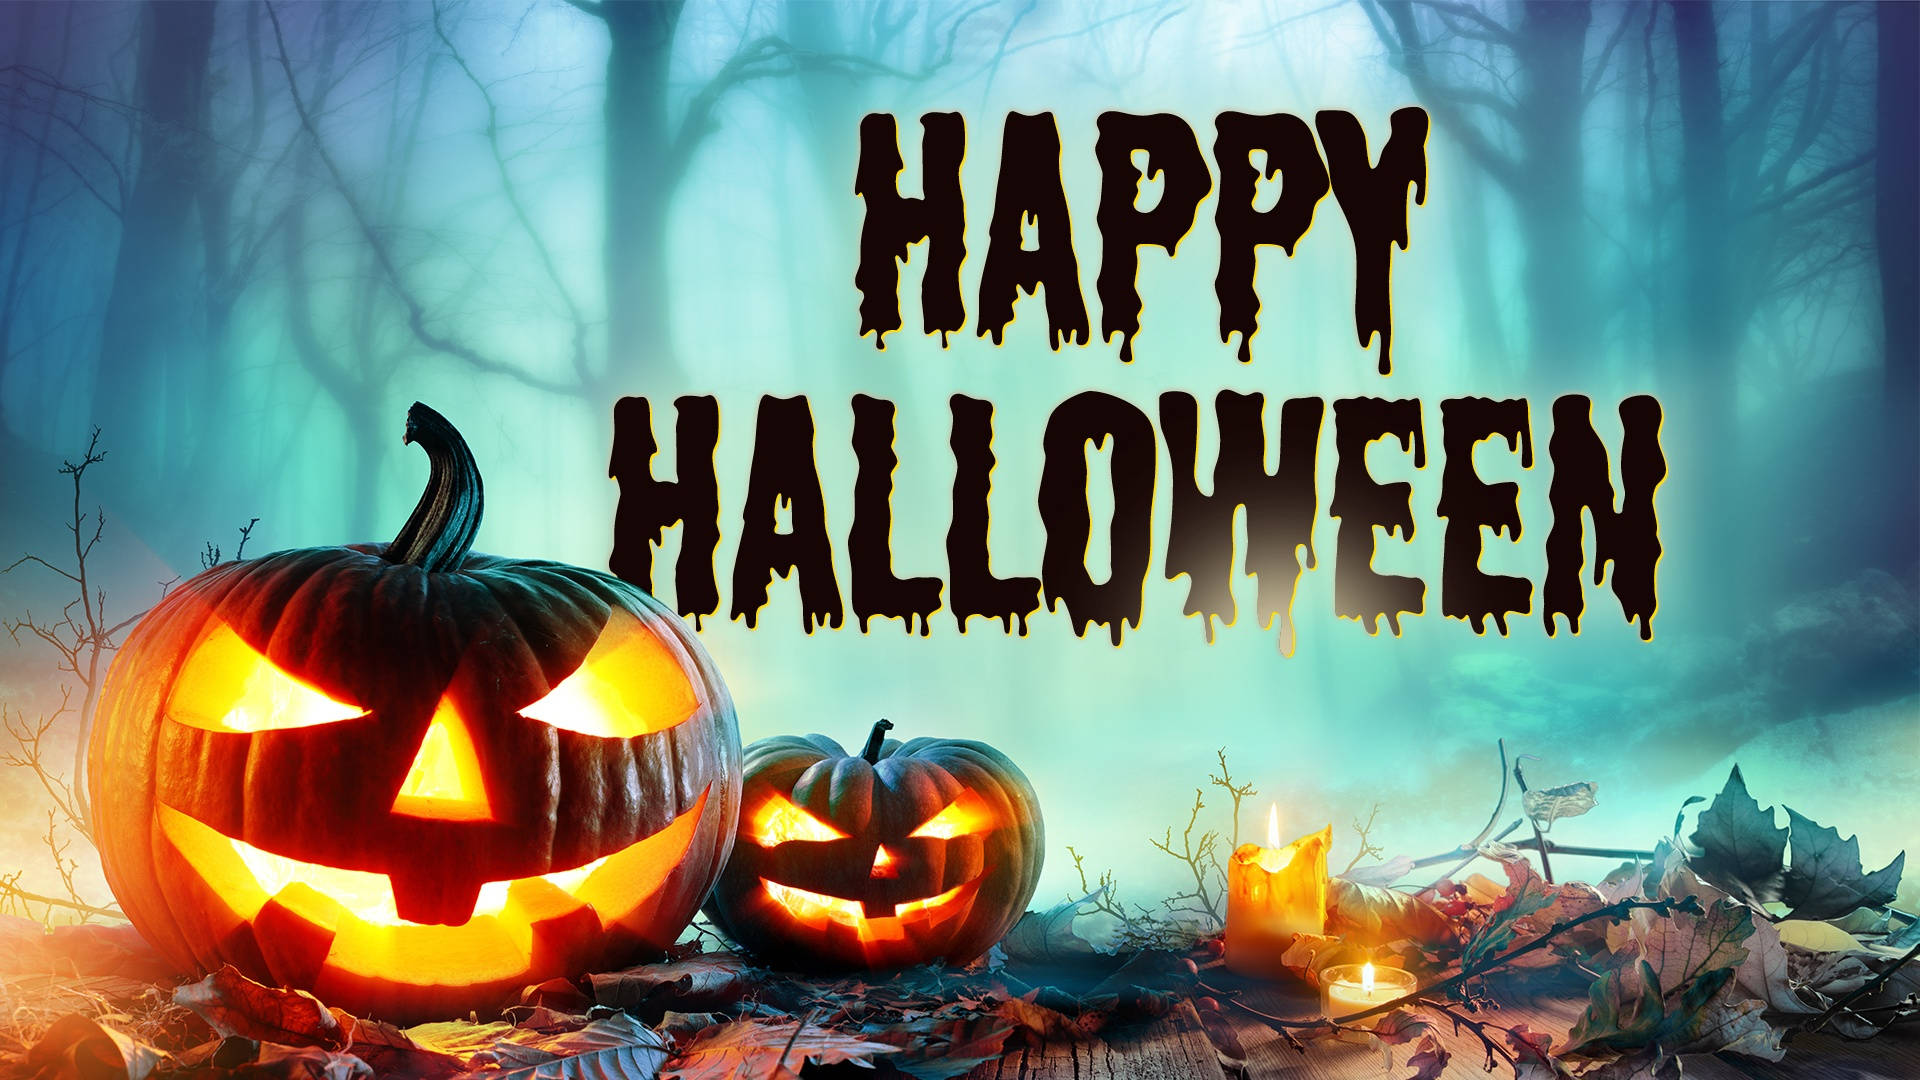 Celebrate Halloween with a Spooky Display. Wallpaper